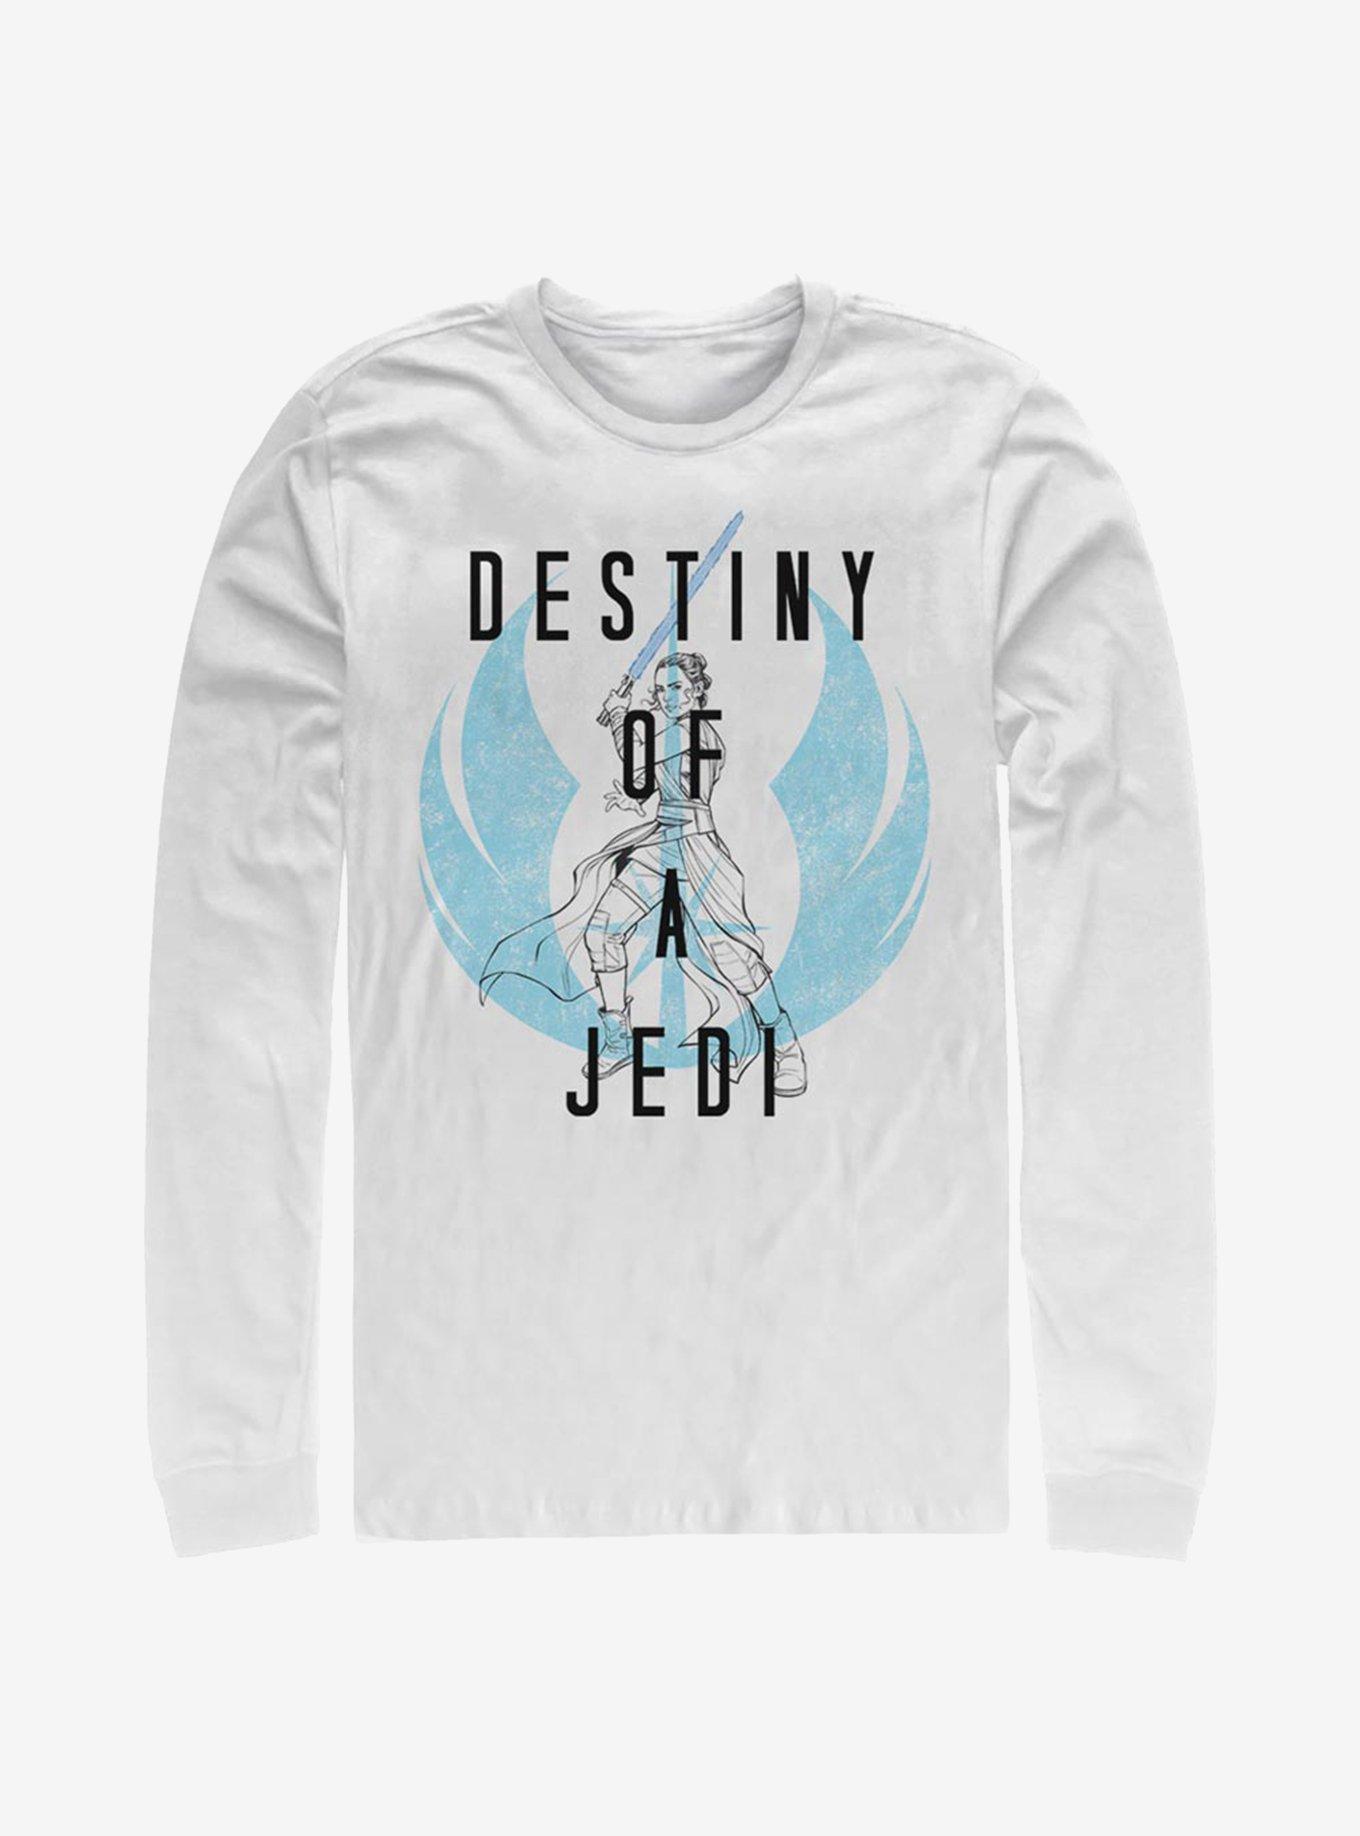 Star Wars: The Rise Of Skywalker Destiny Of A Jedi Long-Sleeve T-Shirt, WHITE, hi-res